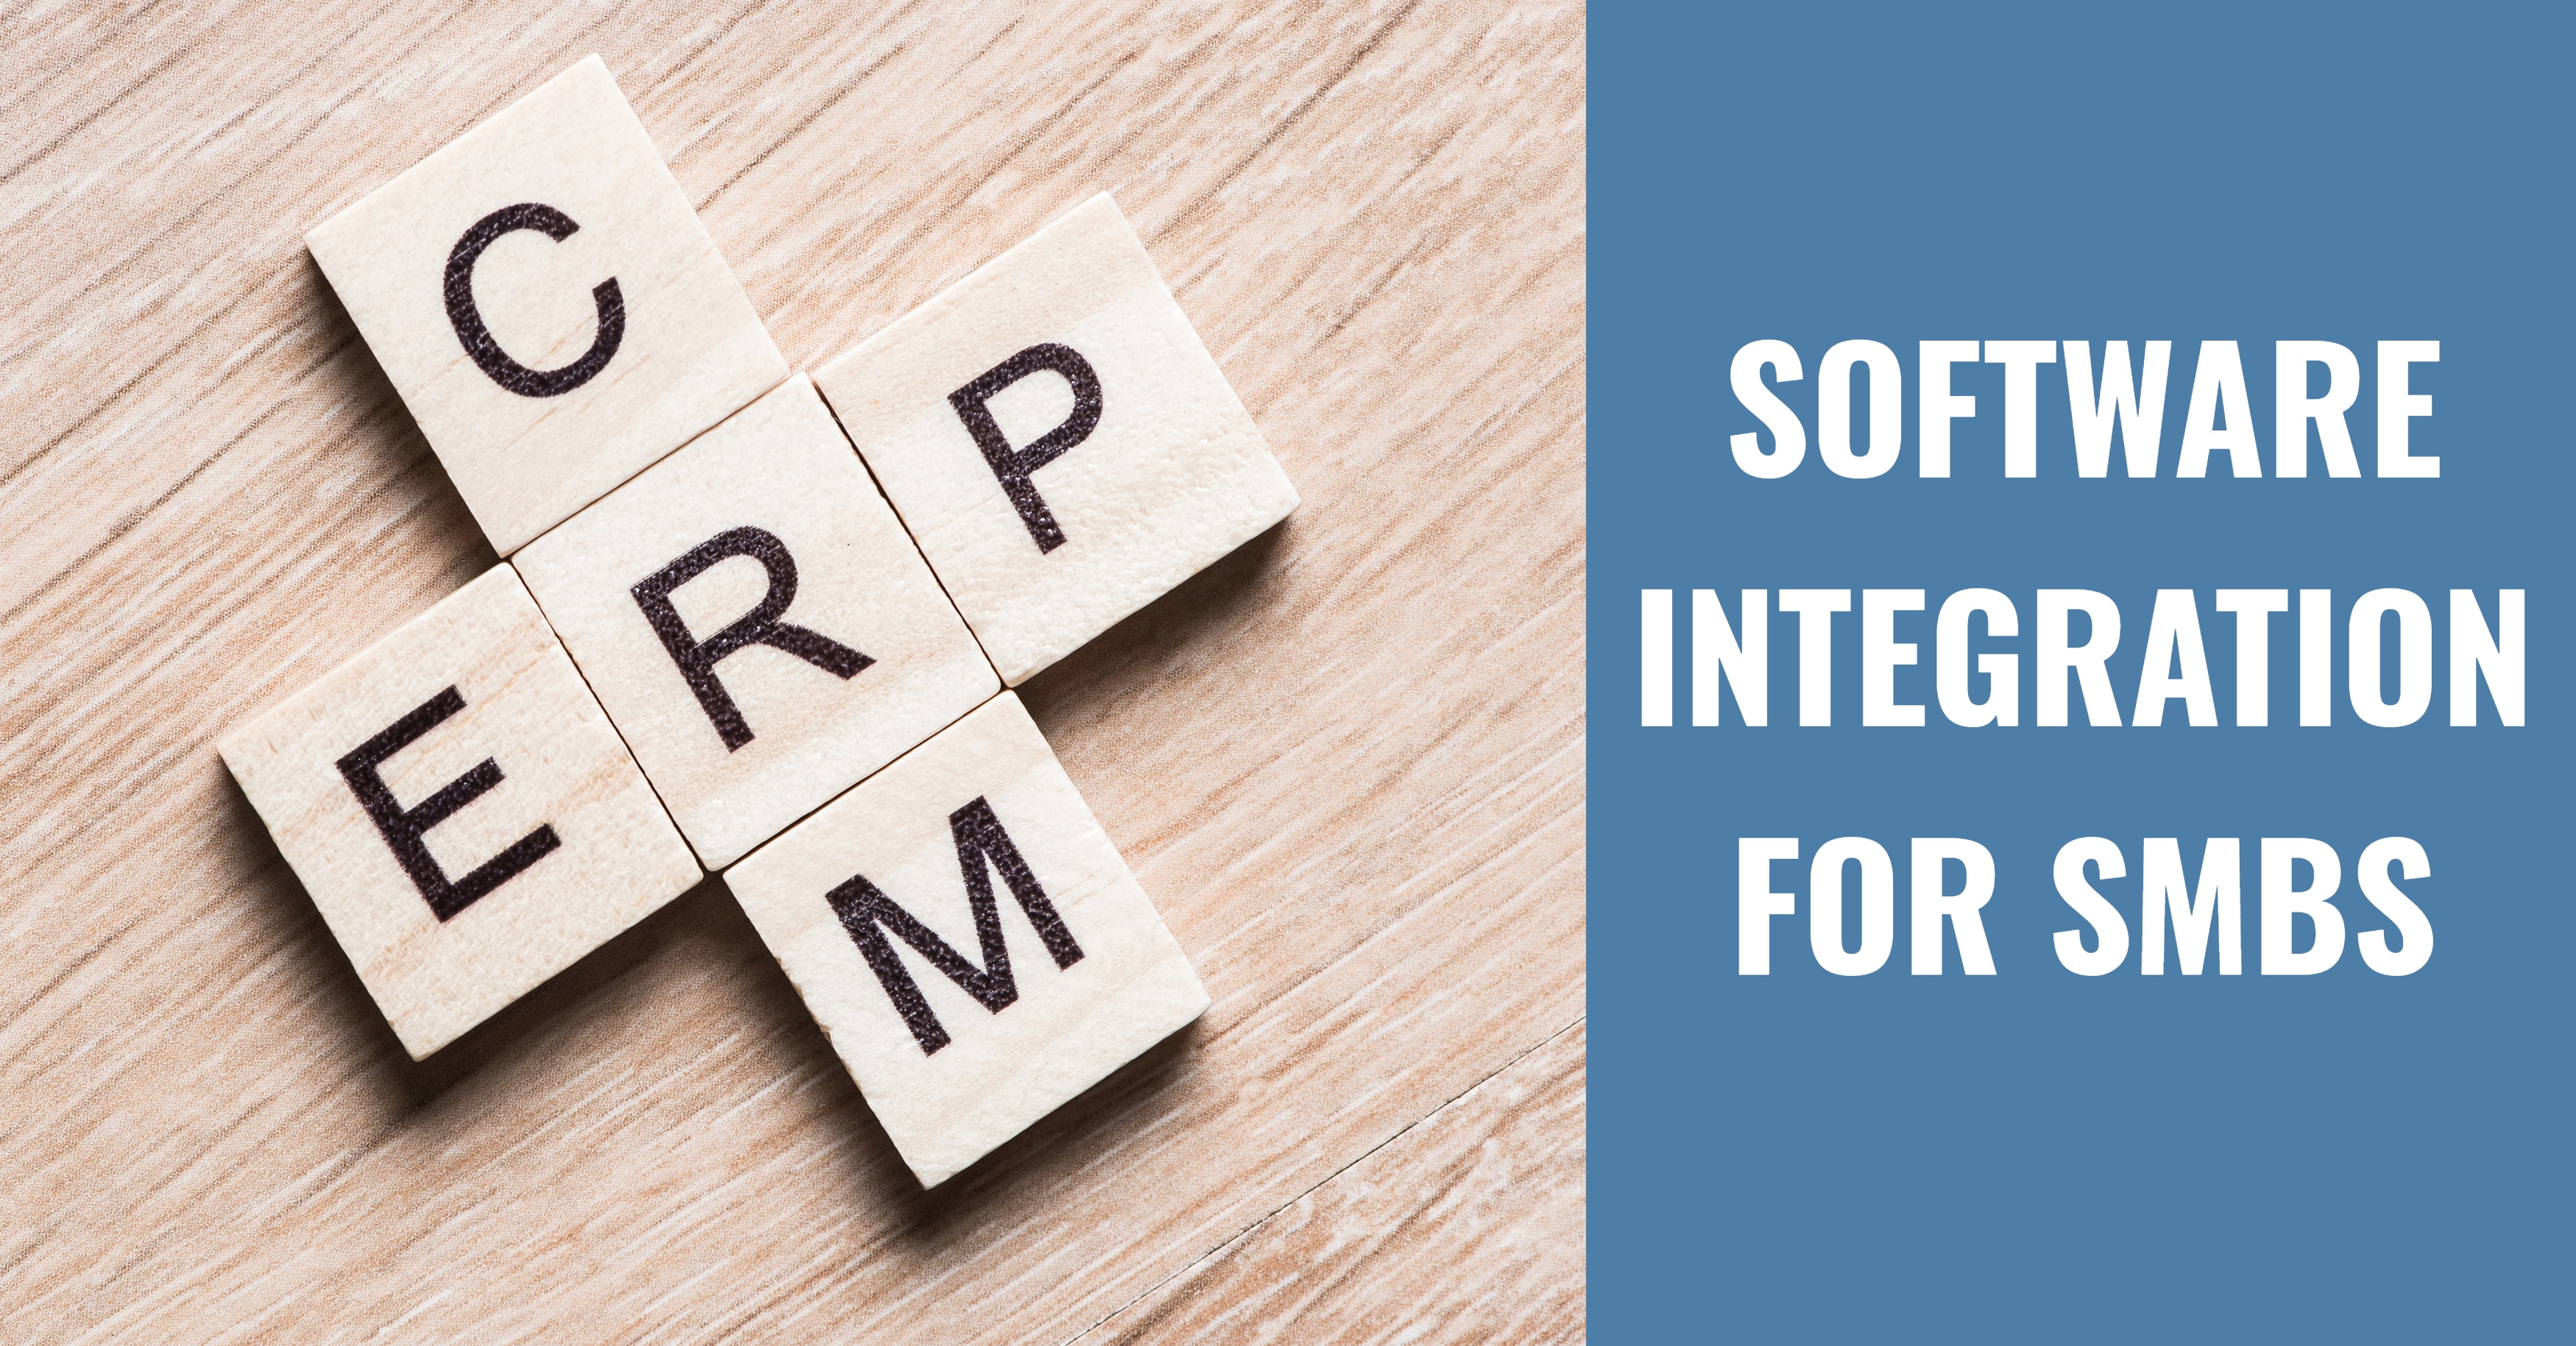 Why Should SMBs Integrate ERP and CRM?